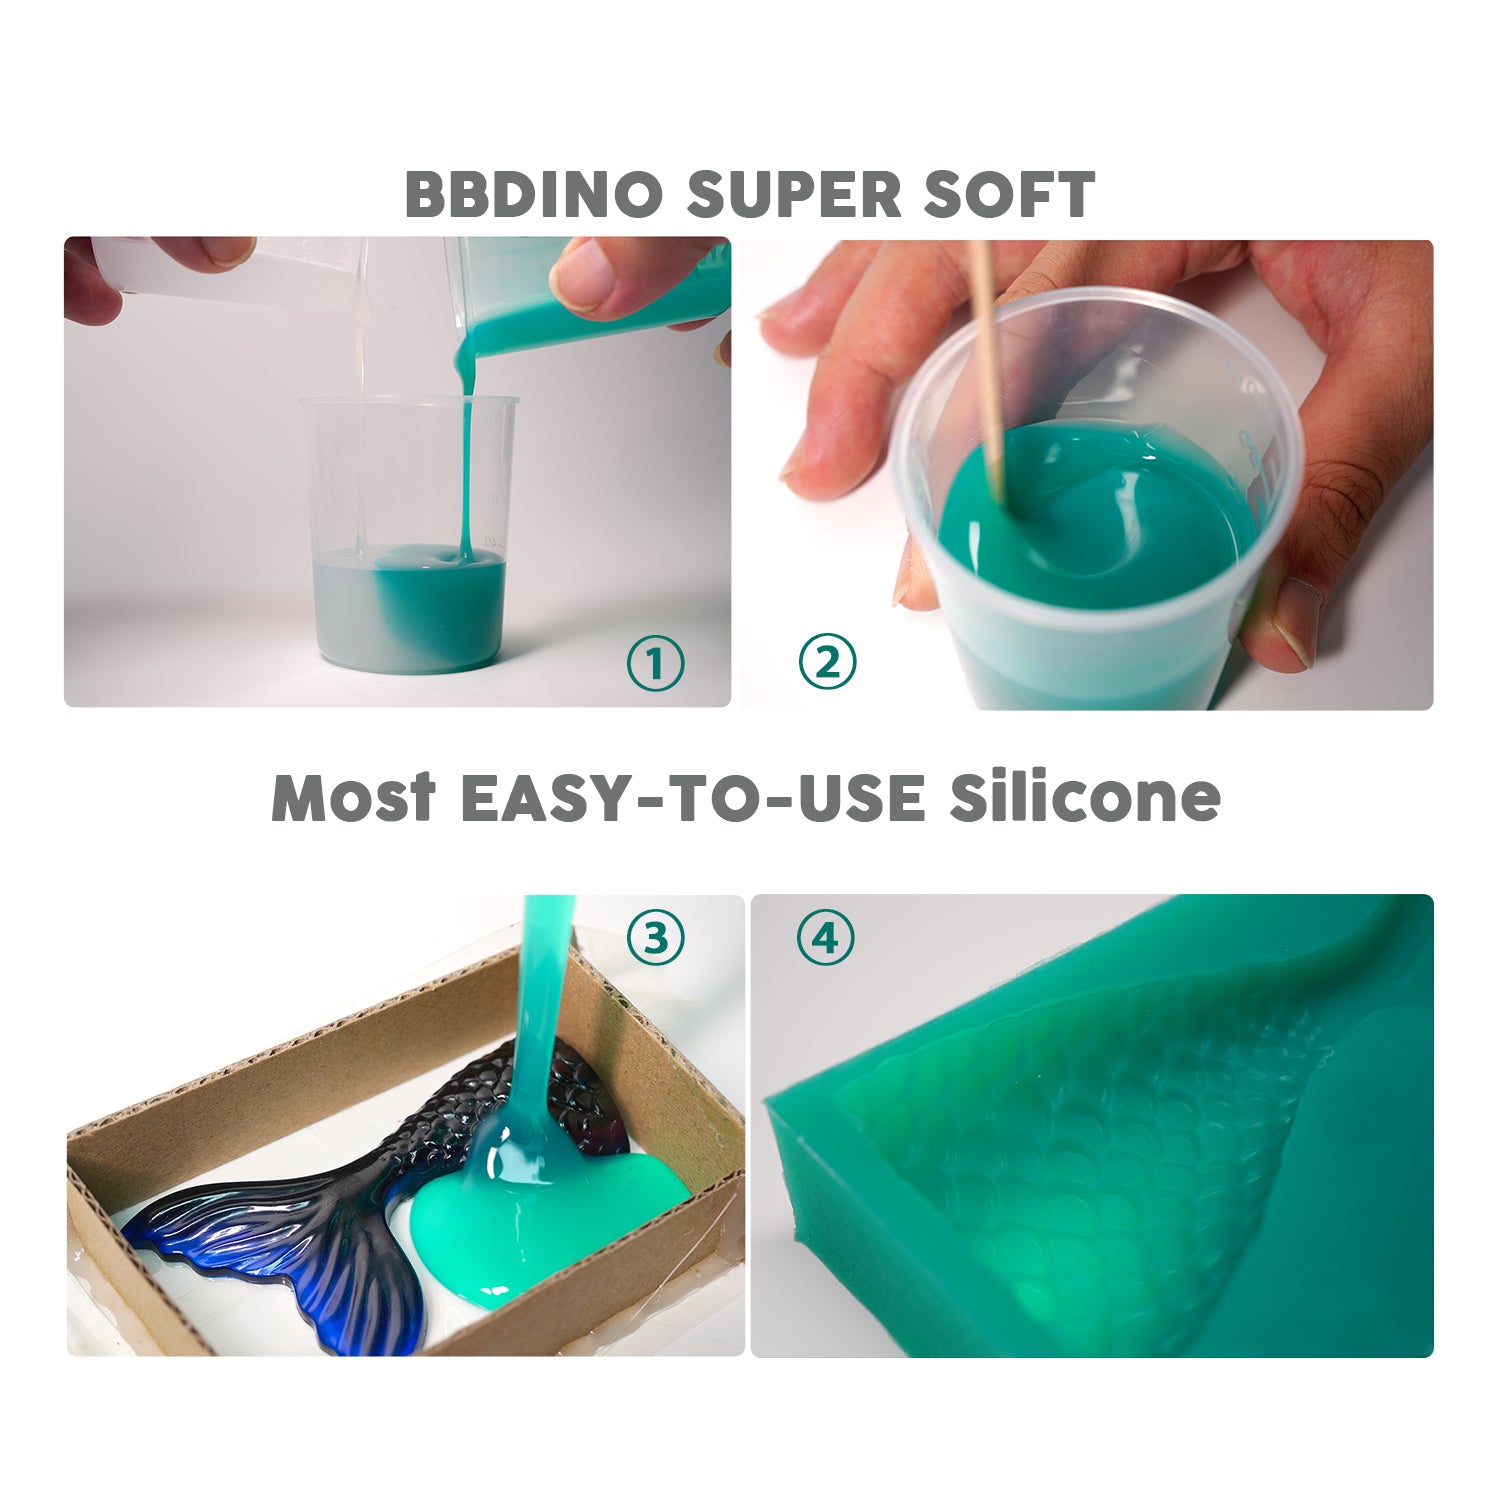 BBDINO Silicone Mold Making Kit, Fast Cure Soft Mold Making Silicone Rubber  2.2 lb(35 Oz), Liquid Silicone for Mold Making, for